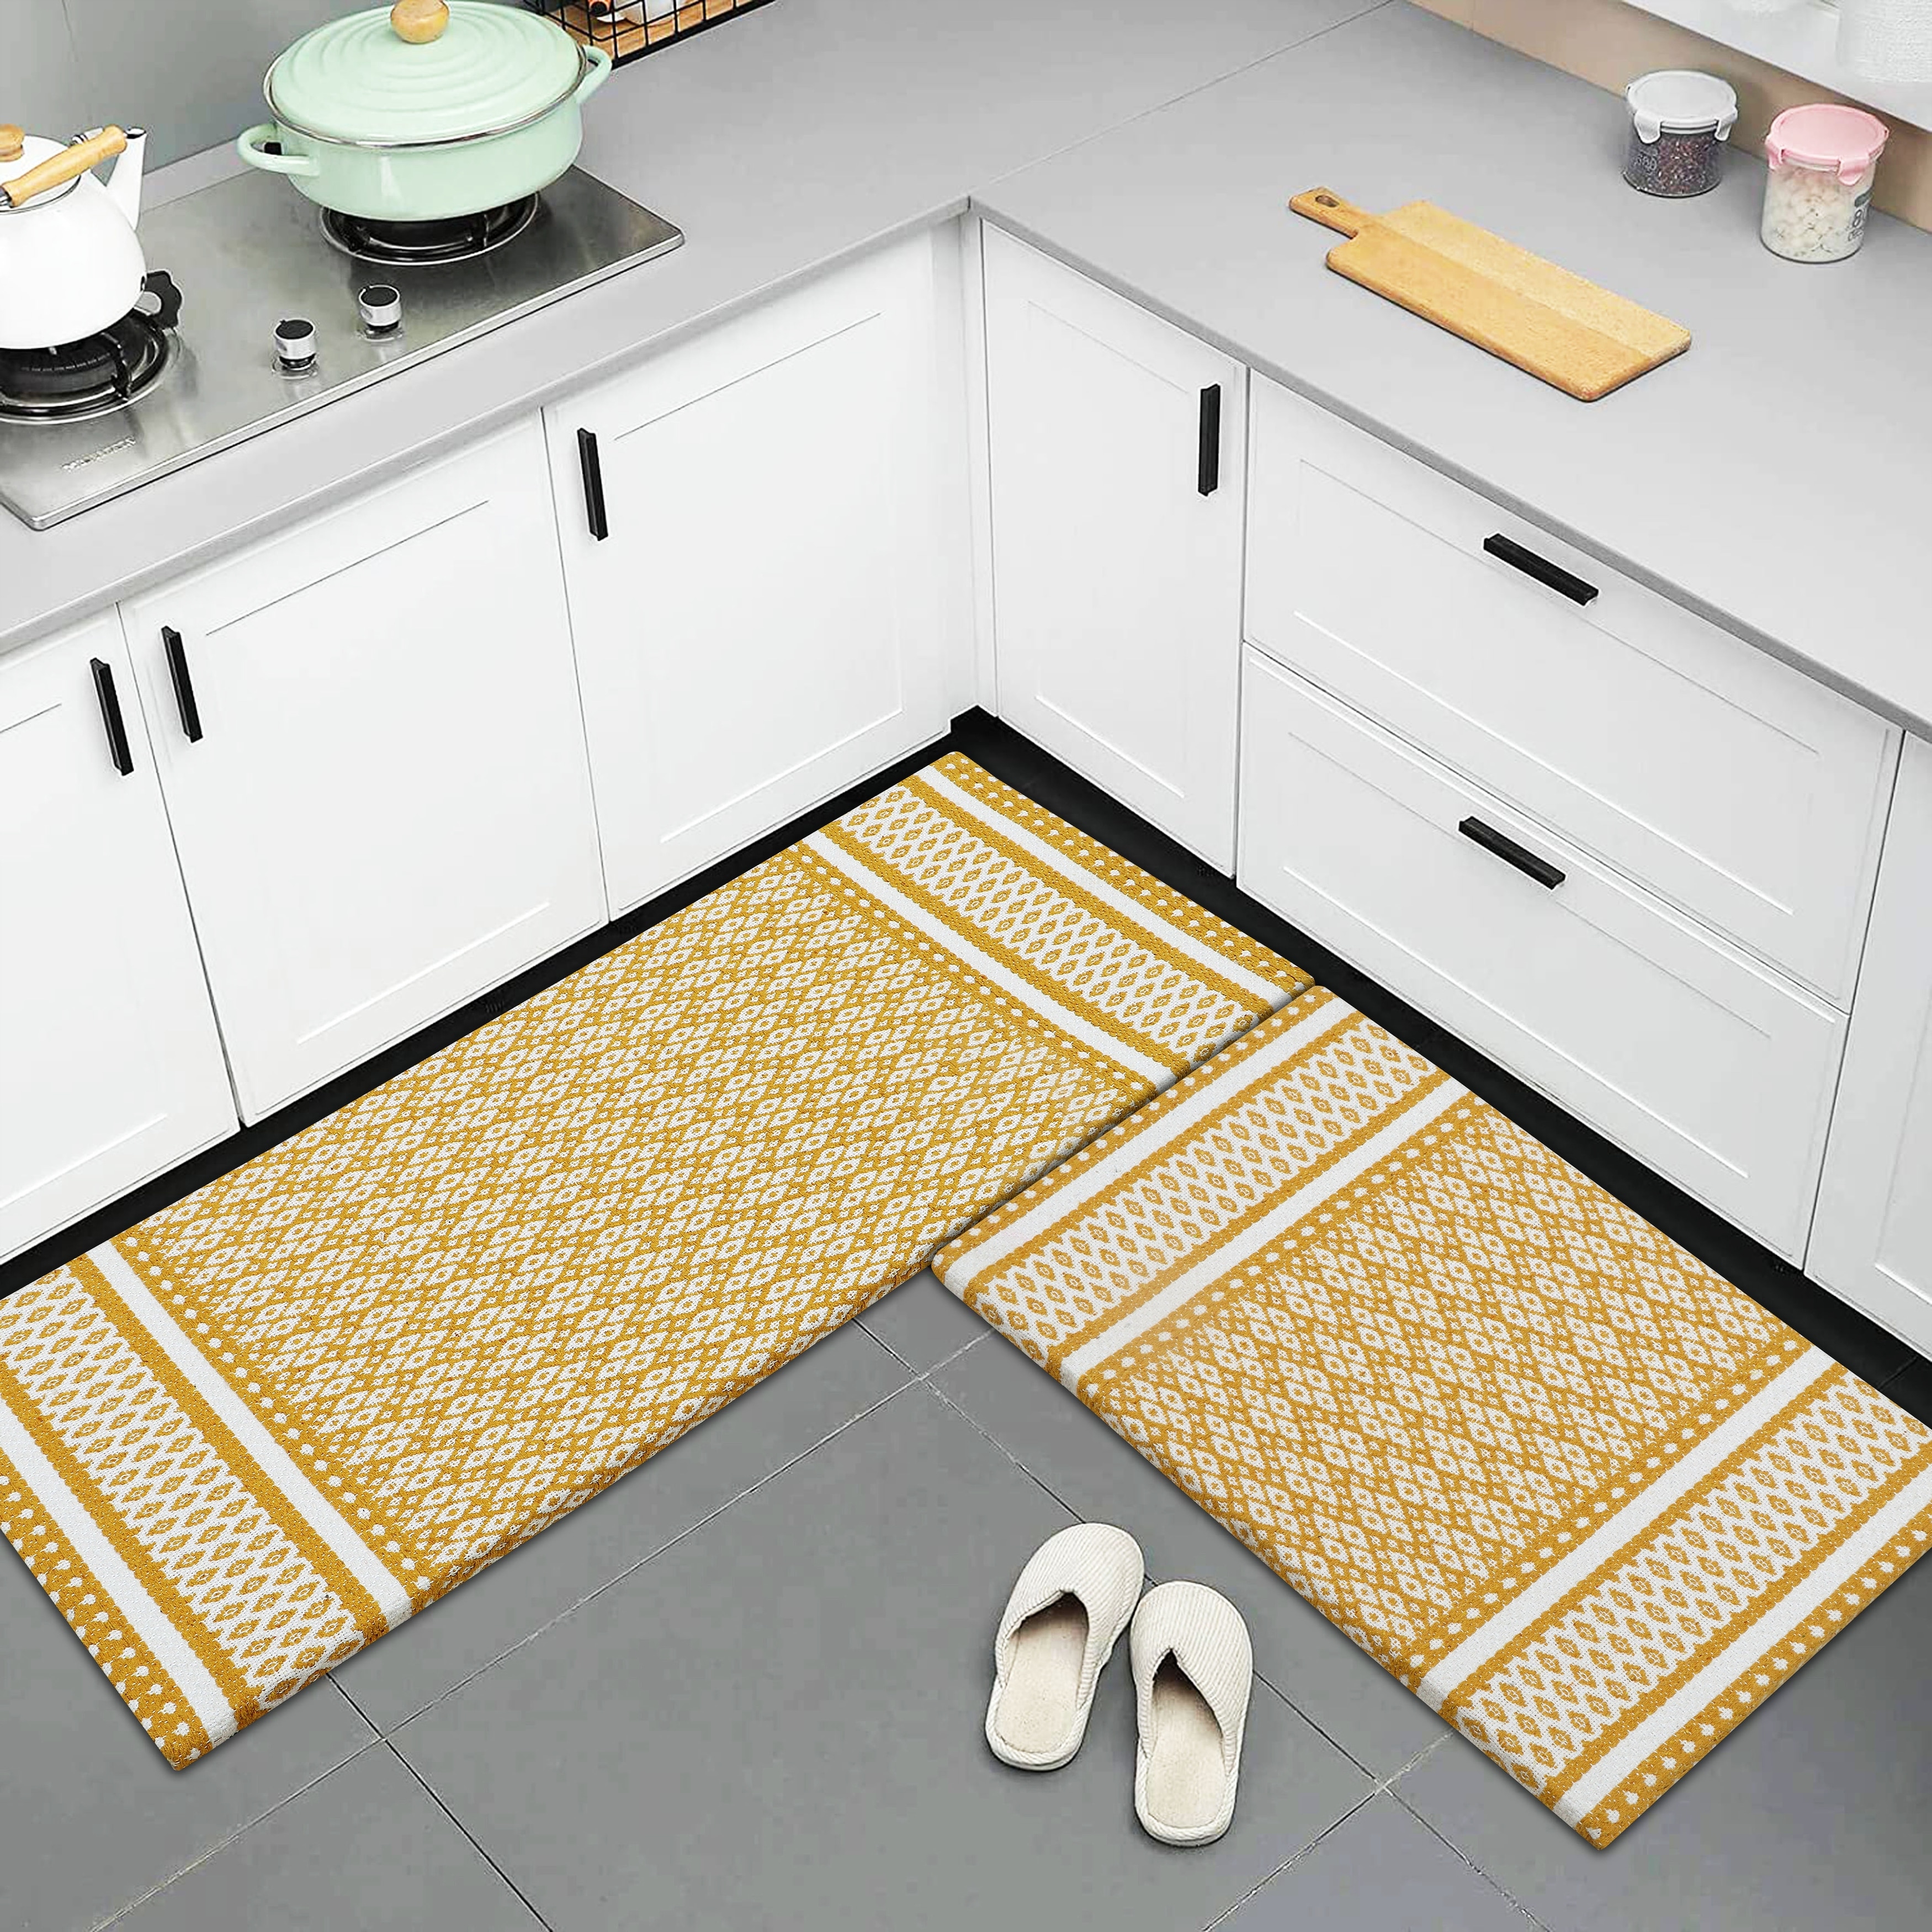 https://ak1.ostkcdn.com/images/products/is/images/direct/2a09d180b373a26786f2348e9c77388e236f87bd/Anti-Fatigue-Standing-Cushioned-Kitchen-Bath-Mats-%5BSet-of-2%5D-%7C-Woven-Cotton-%7C-Waterproof-%7C-Non-Slip-%7C-for-Office%2C-Sink%2C-Laundry.jpg